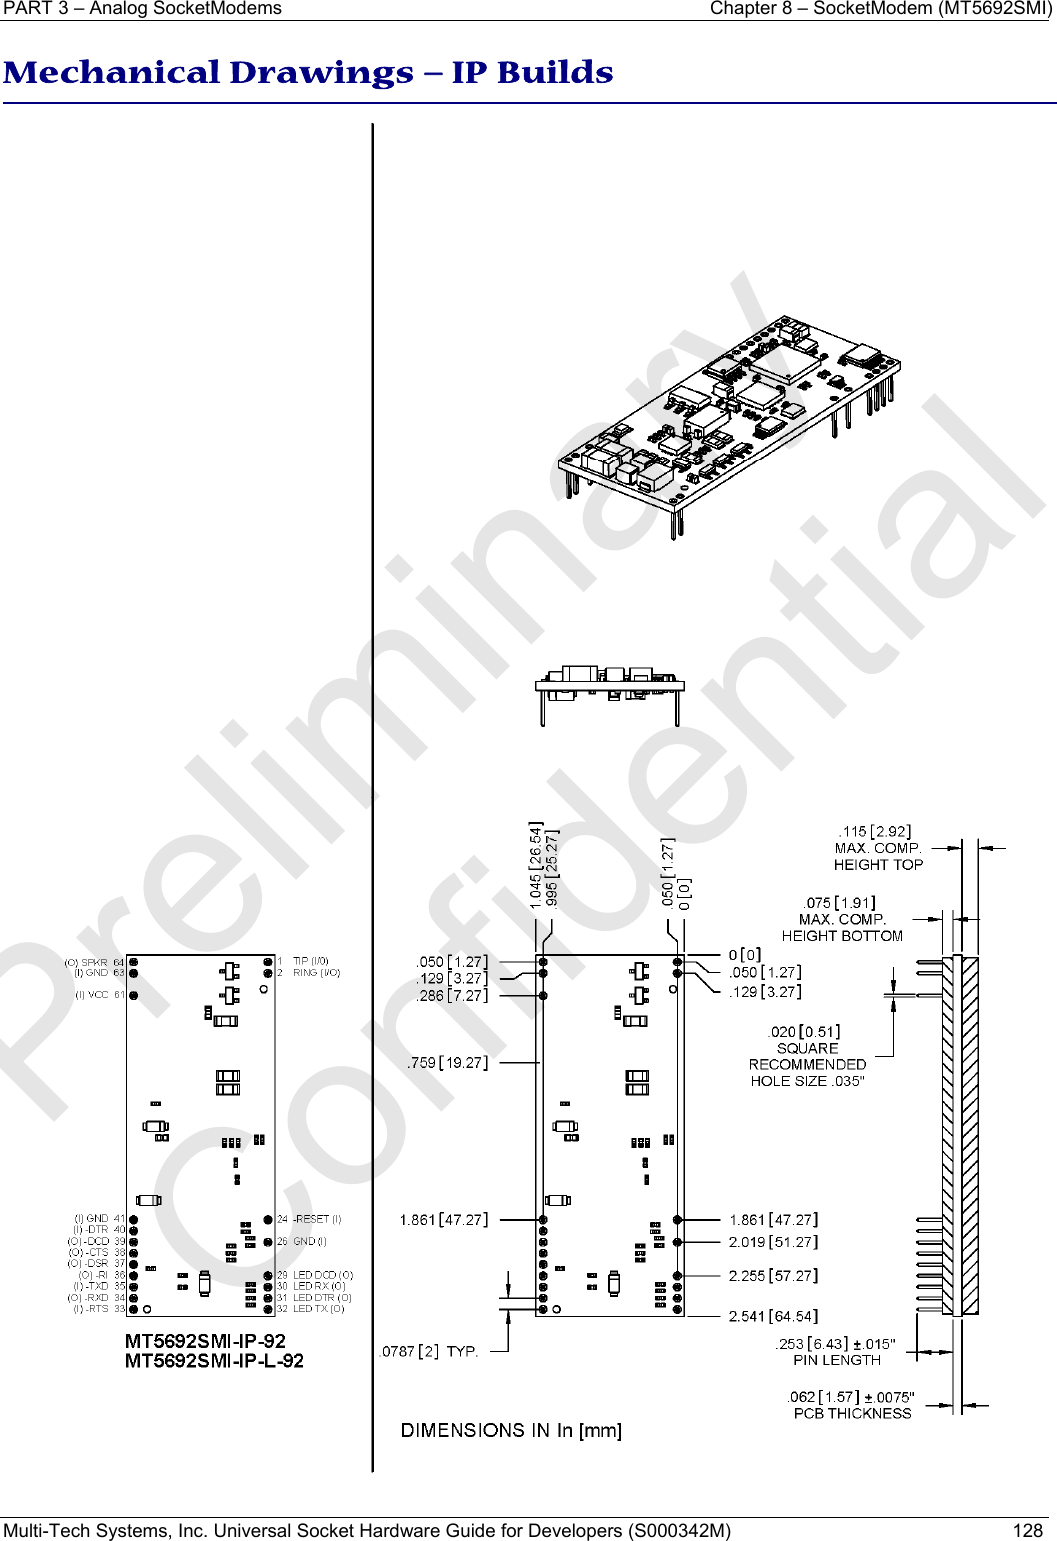 PART 3 – Analog SocketModems    Chapter 8 – SocketModem (MT5692SMI) Multi-Tech Systems, Inc. Universal Socket Hardware Guide for Developers (S000342M)  128  Mechanical Drawings − IP Builds     Preliminary  Confidential